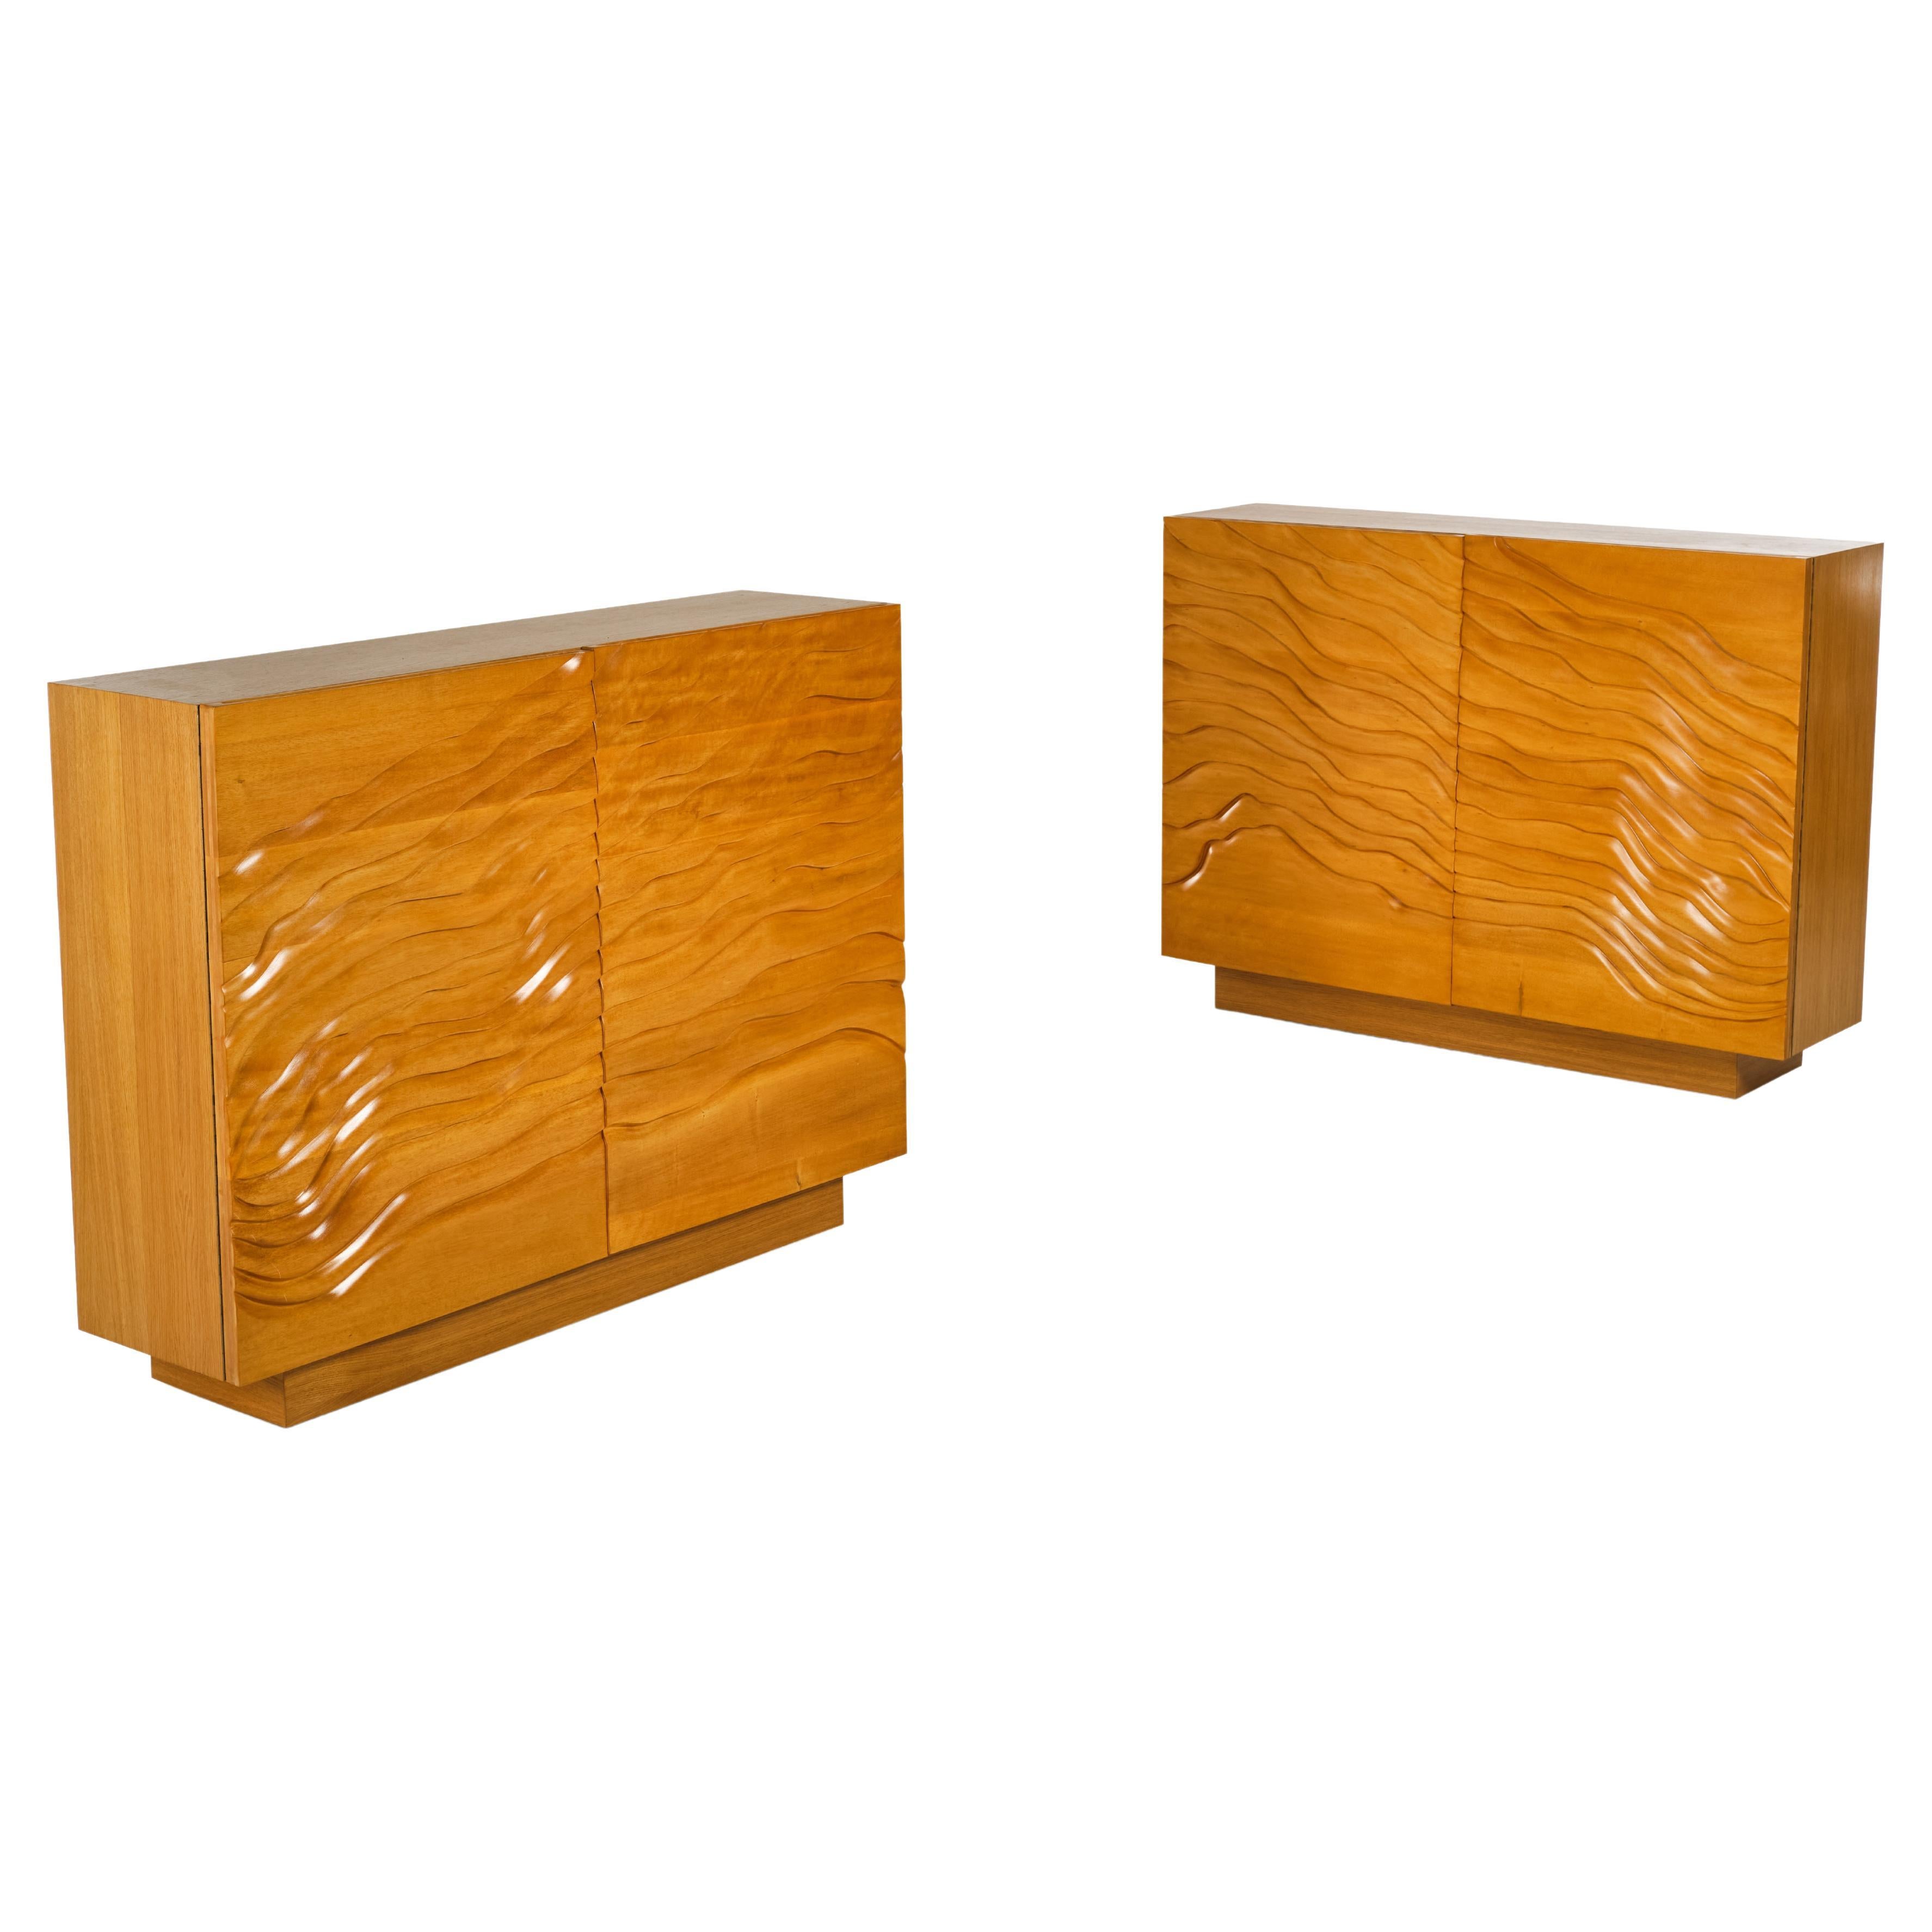 Pair of Sculptural Cabinets, Italian Design, 1960 circa For Sale